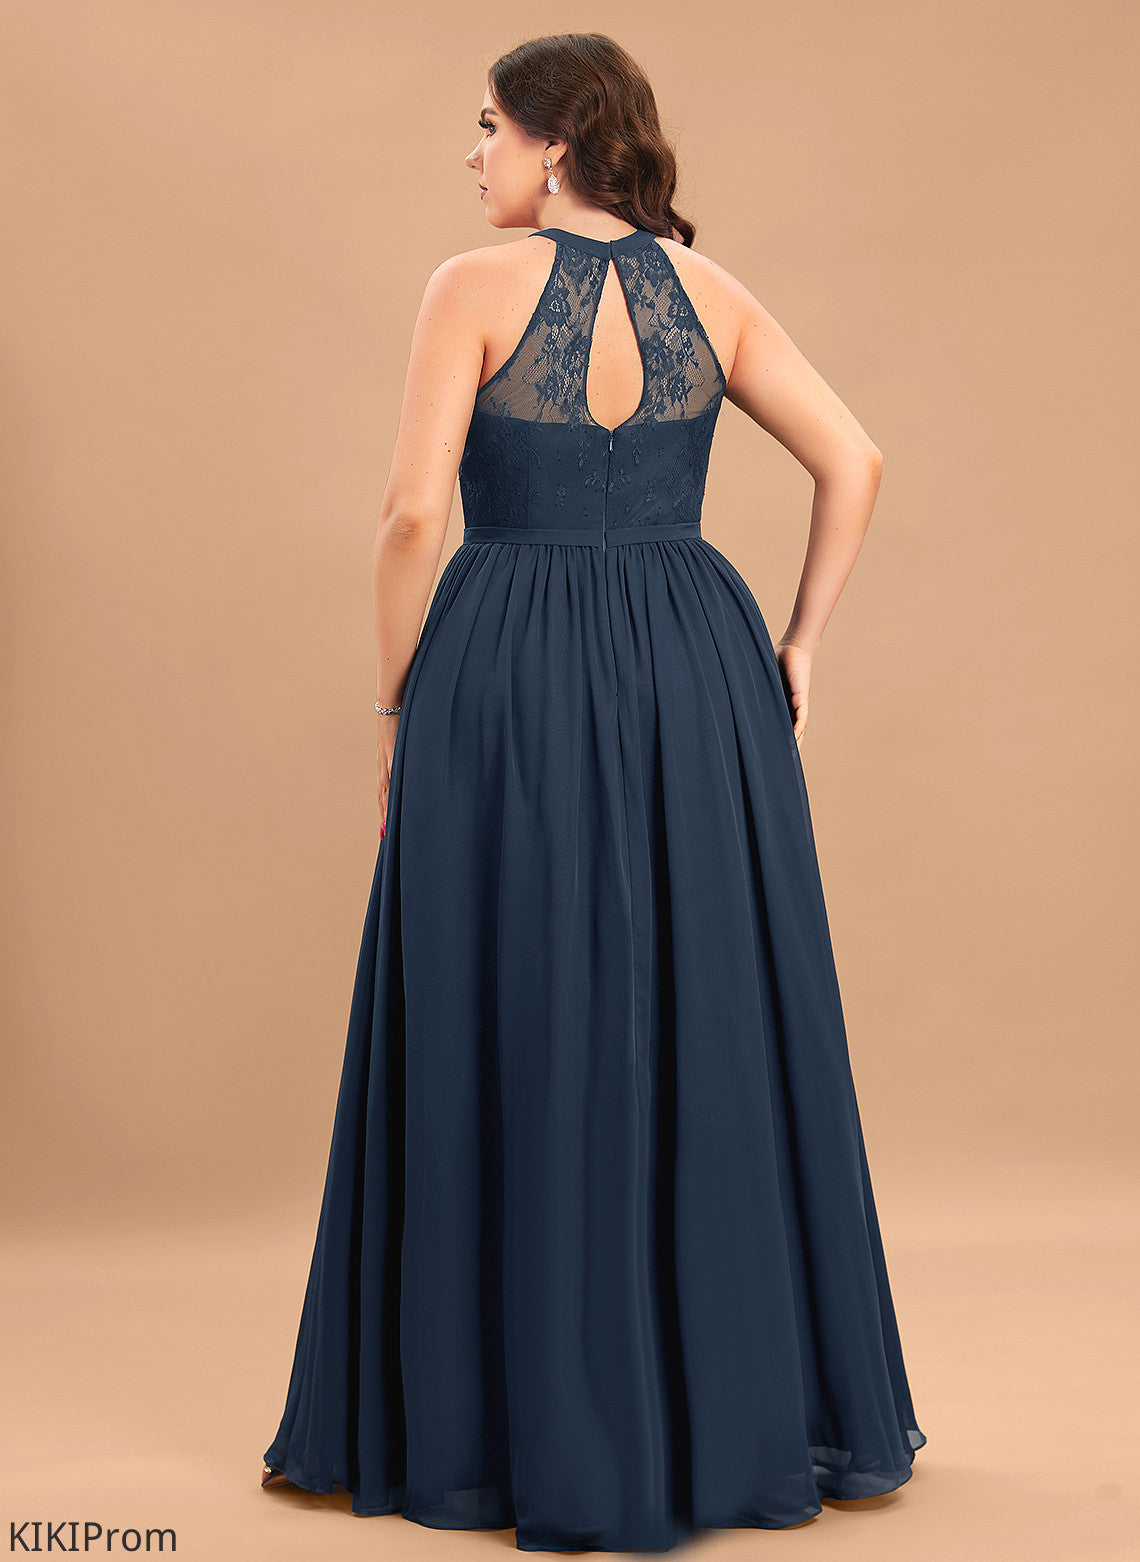 Scoop A-Line Fabric Silhouette Floor-Length Length Illusion Lace Straps&Sleeves Neckline Marianna Floor Length Bridesmaid Dresses